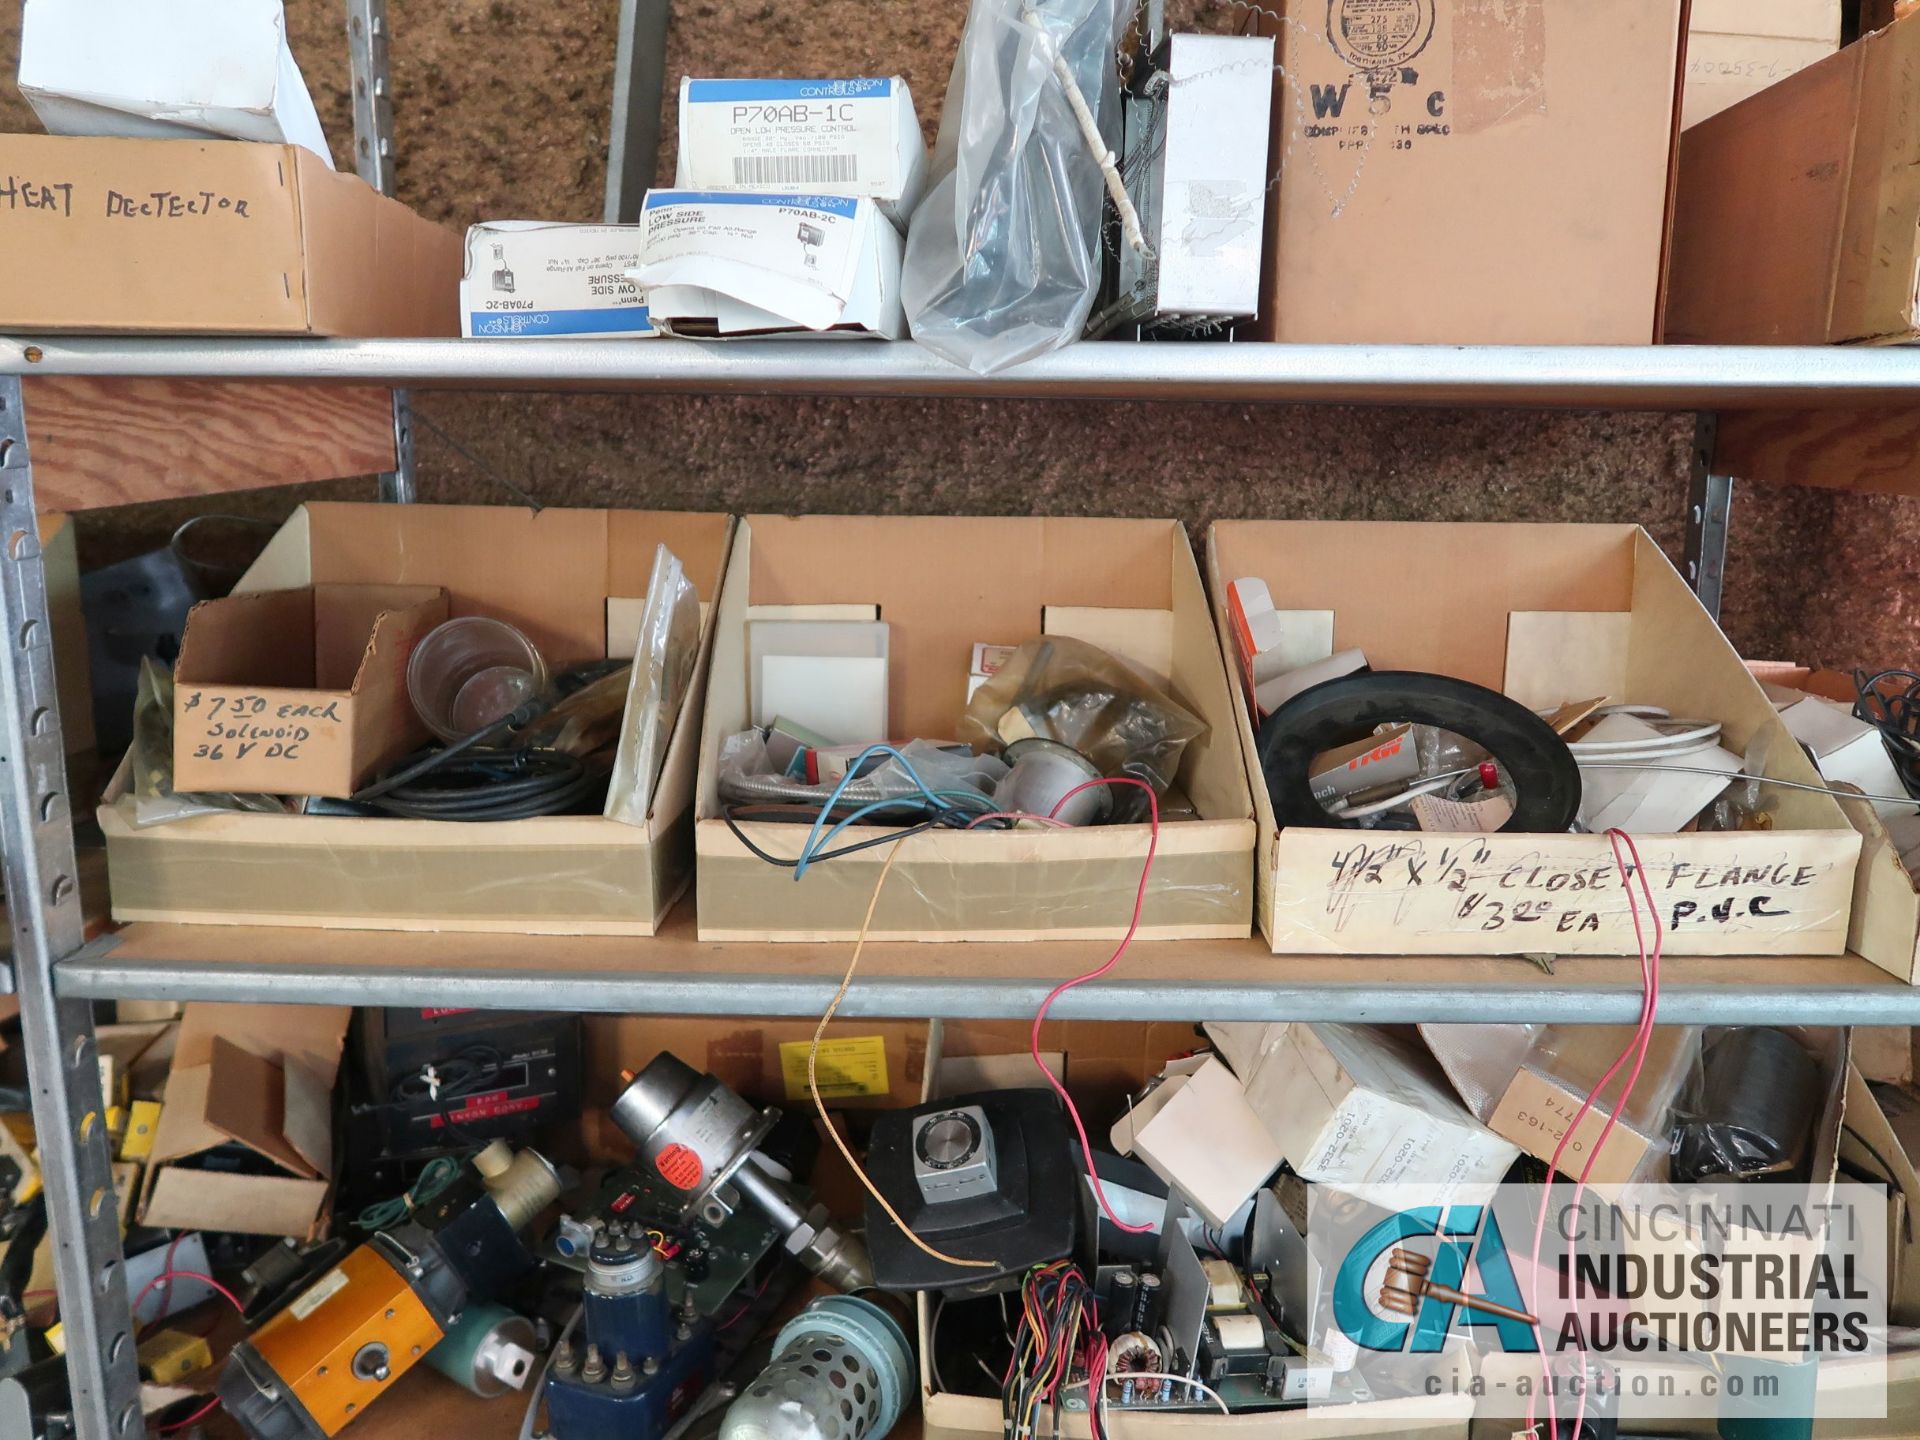 CONTENTS OF (16) SHELVES INCLUDING MISCELLANEOUS VALVES, THERMOSTATS, ANALYZERS, ELECTRICAL, CONTROL - Image 30 of 47